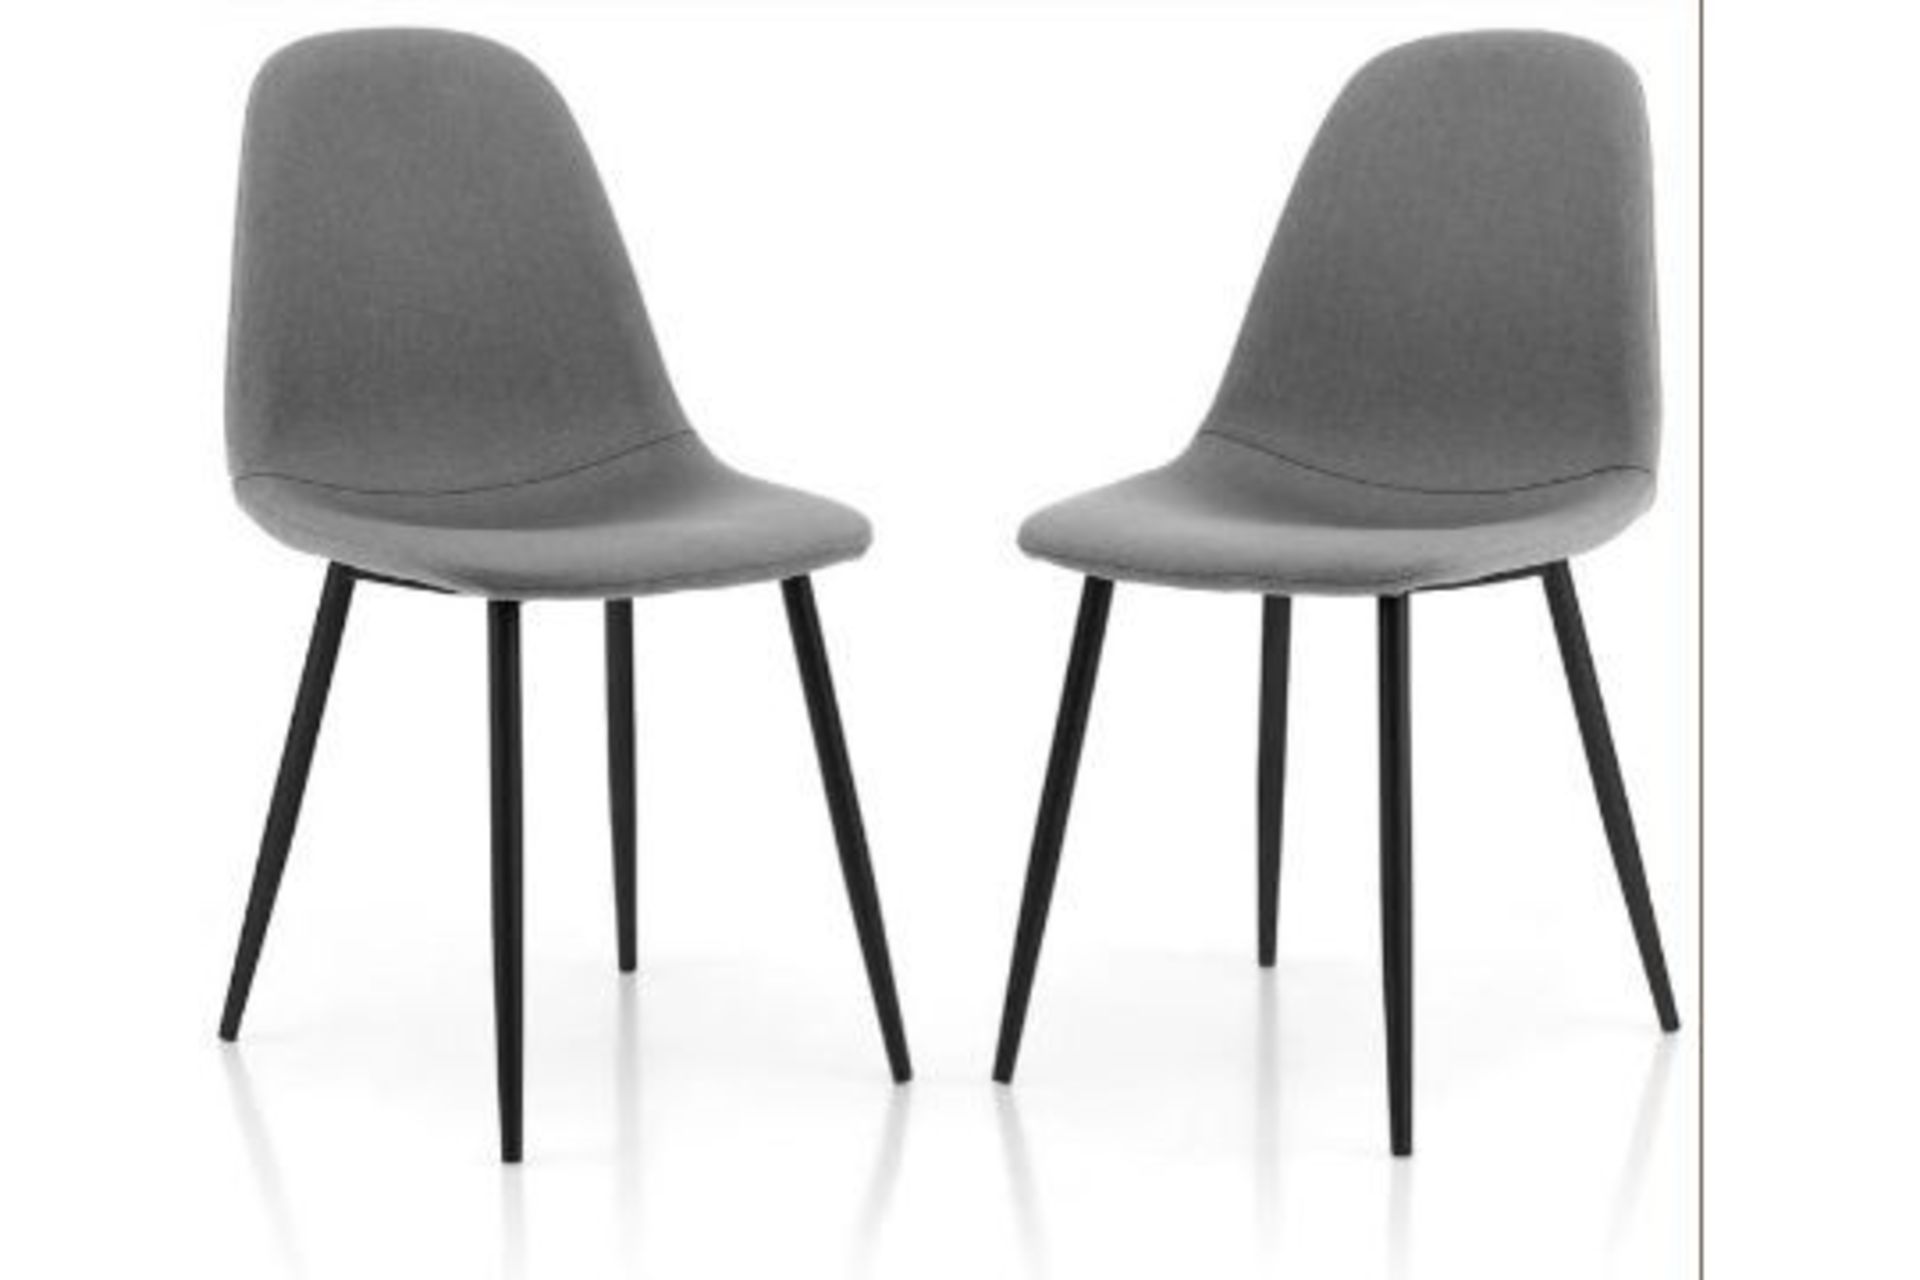 UPHOLSTERED DINING CHAIRS SET OF 2 WITH METAL LEGS-GREY. - R14.3. The high rebound foam